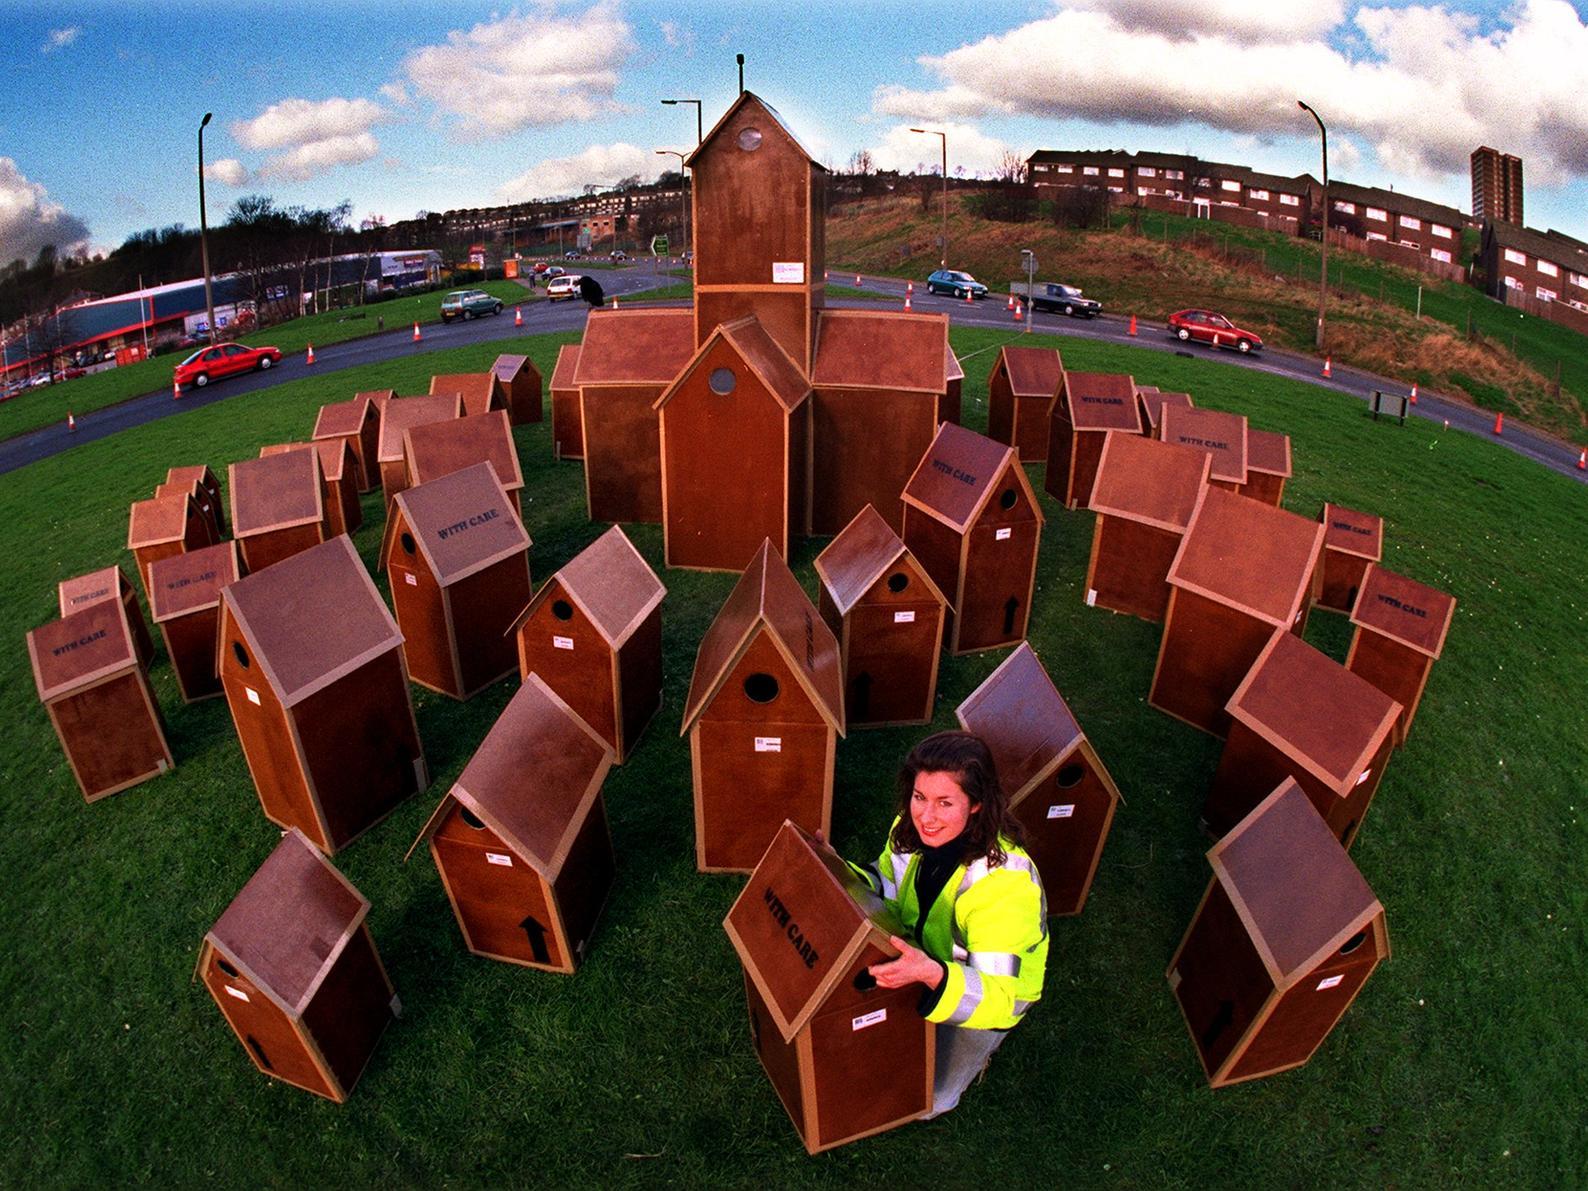 Artist Gill Russell with her Cardboard City on the Pudsey Road roundabout near Wickes.